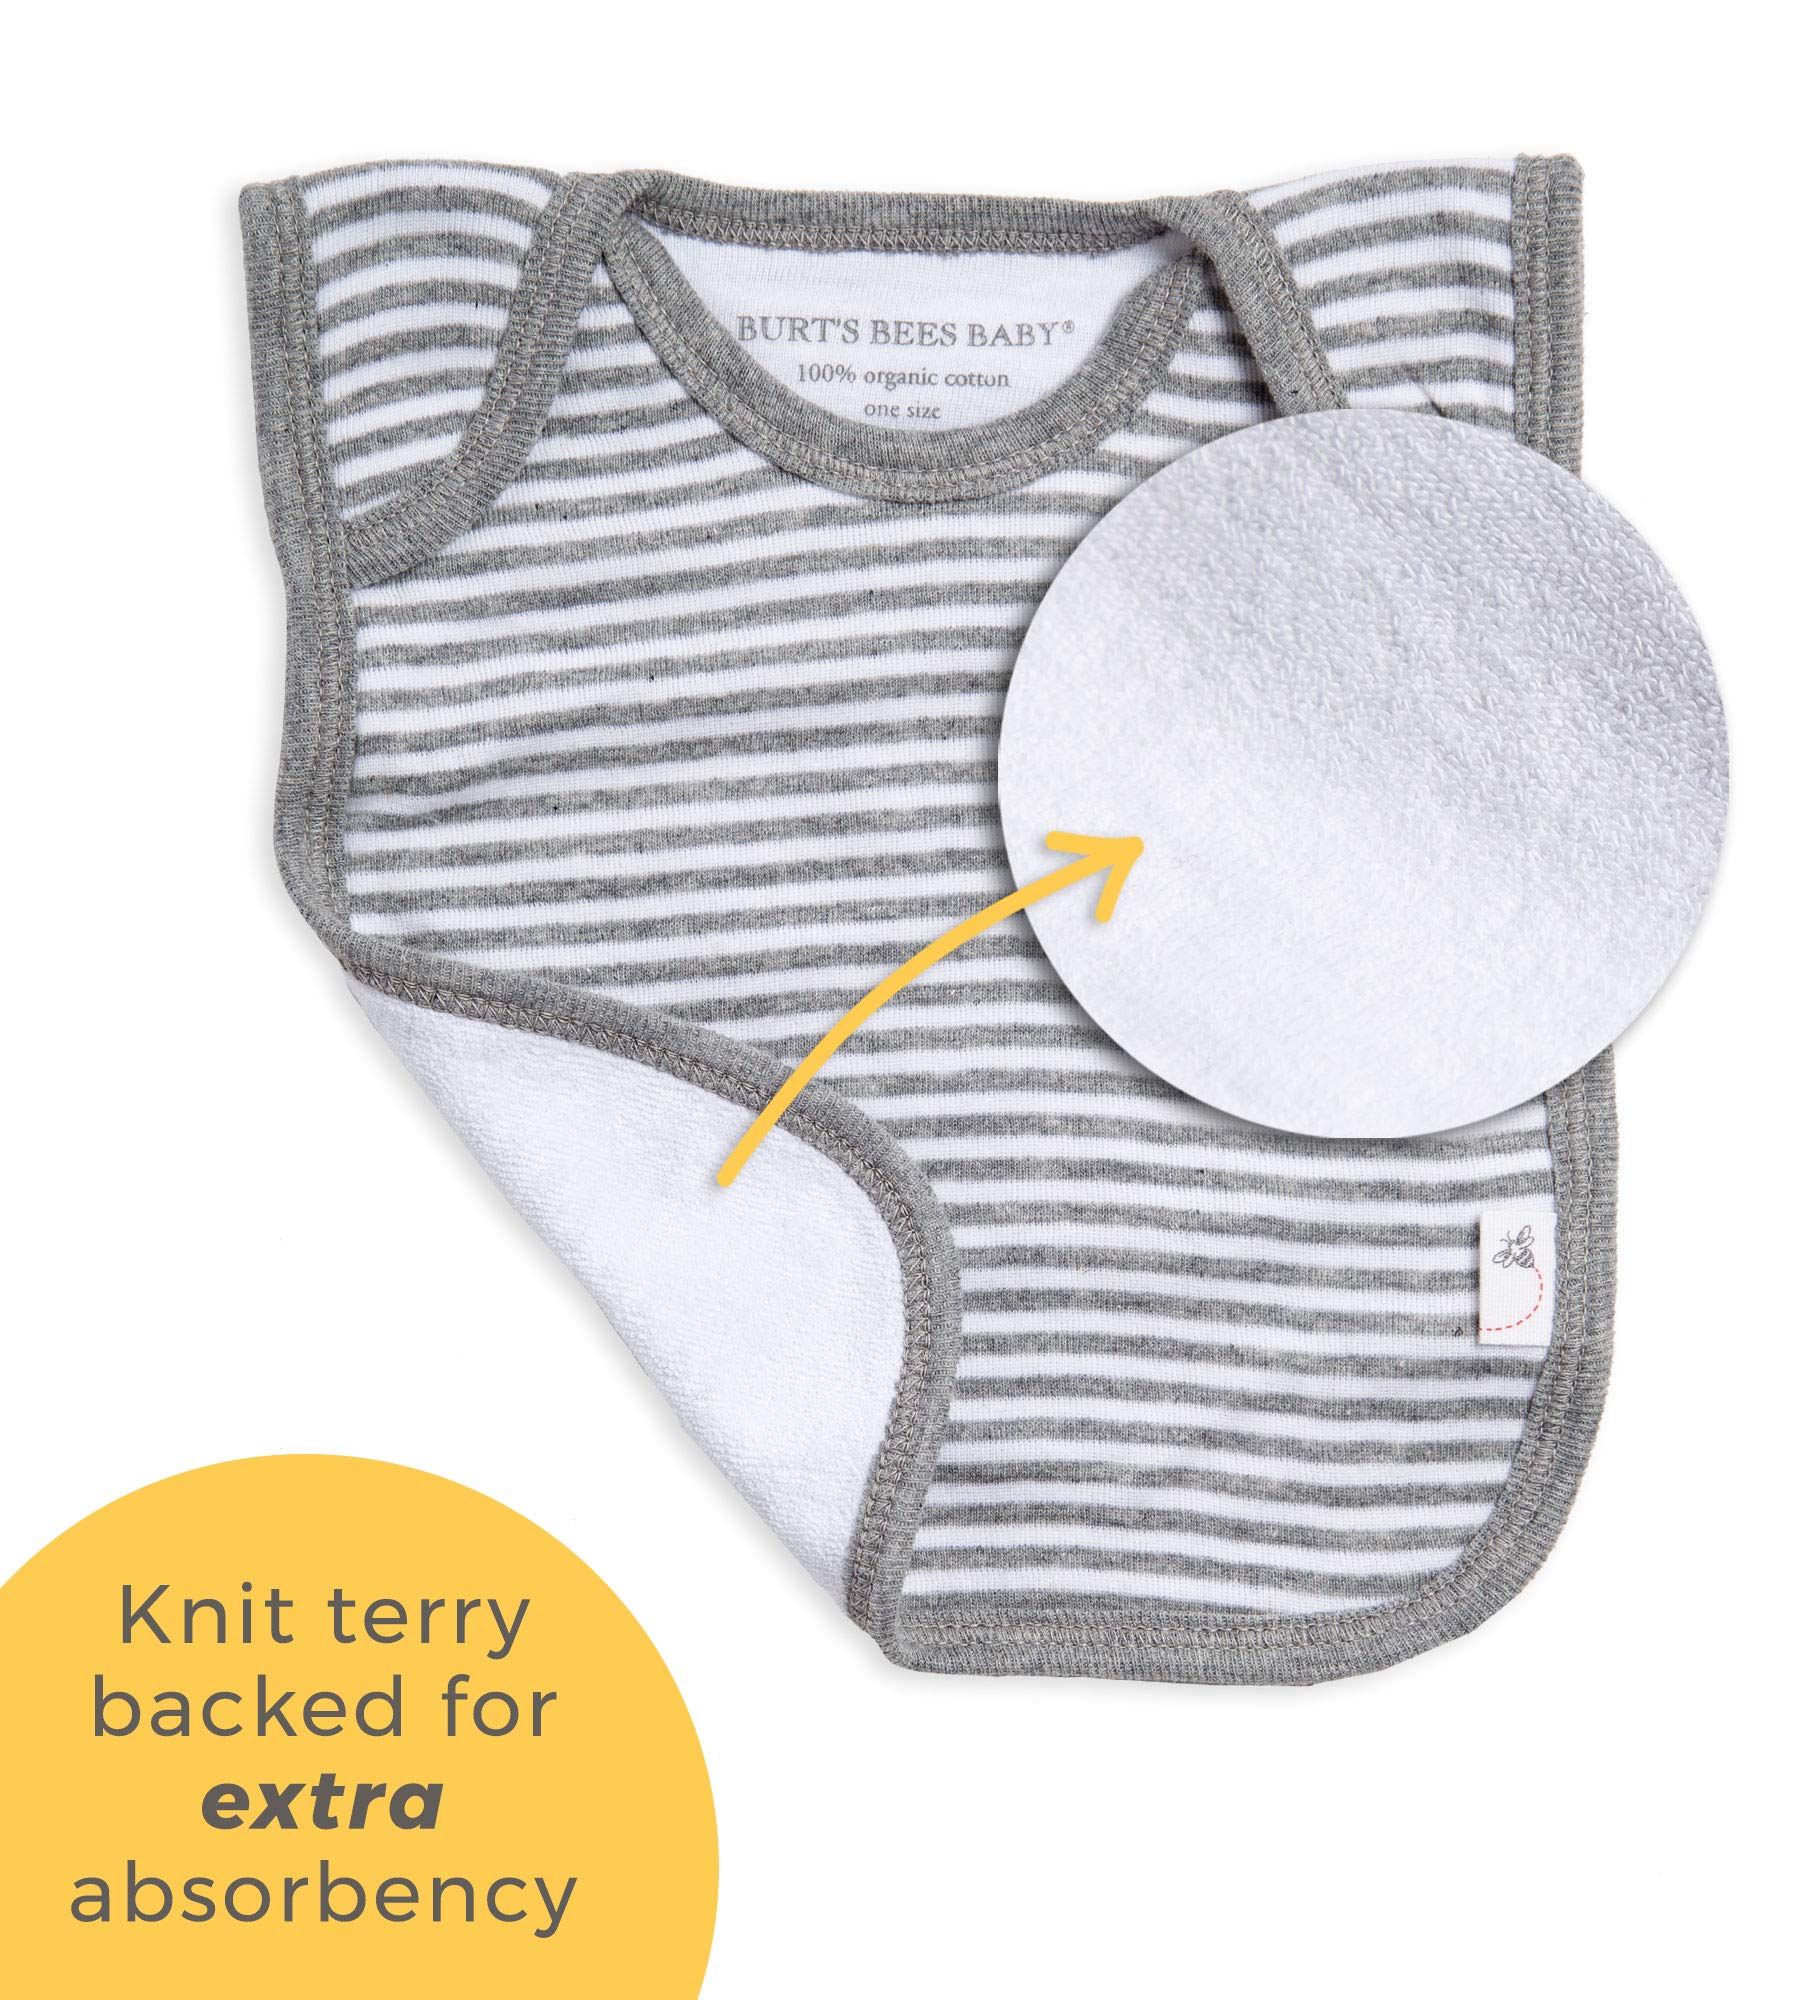 Burt's Bees Baby Bibs, Lap-Shoulder Drool Cloths, 100% Organic Cotton with Absorbent Terry Towel Backing